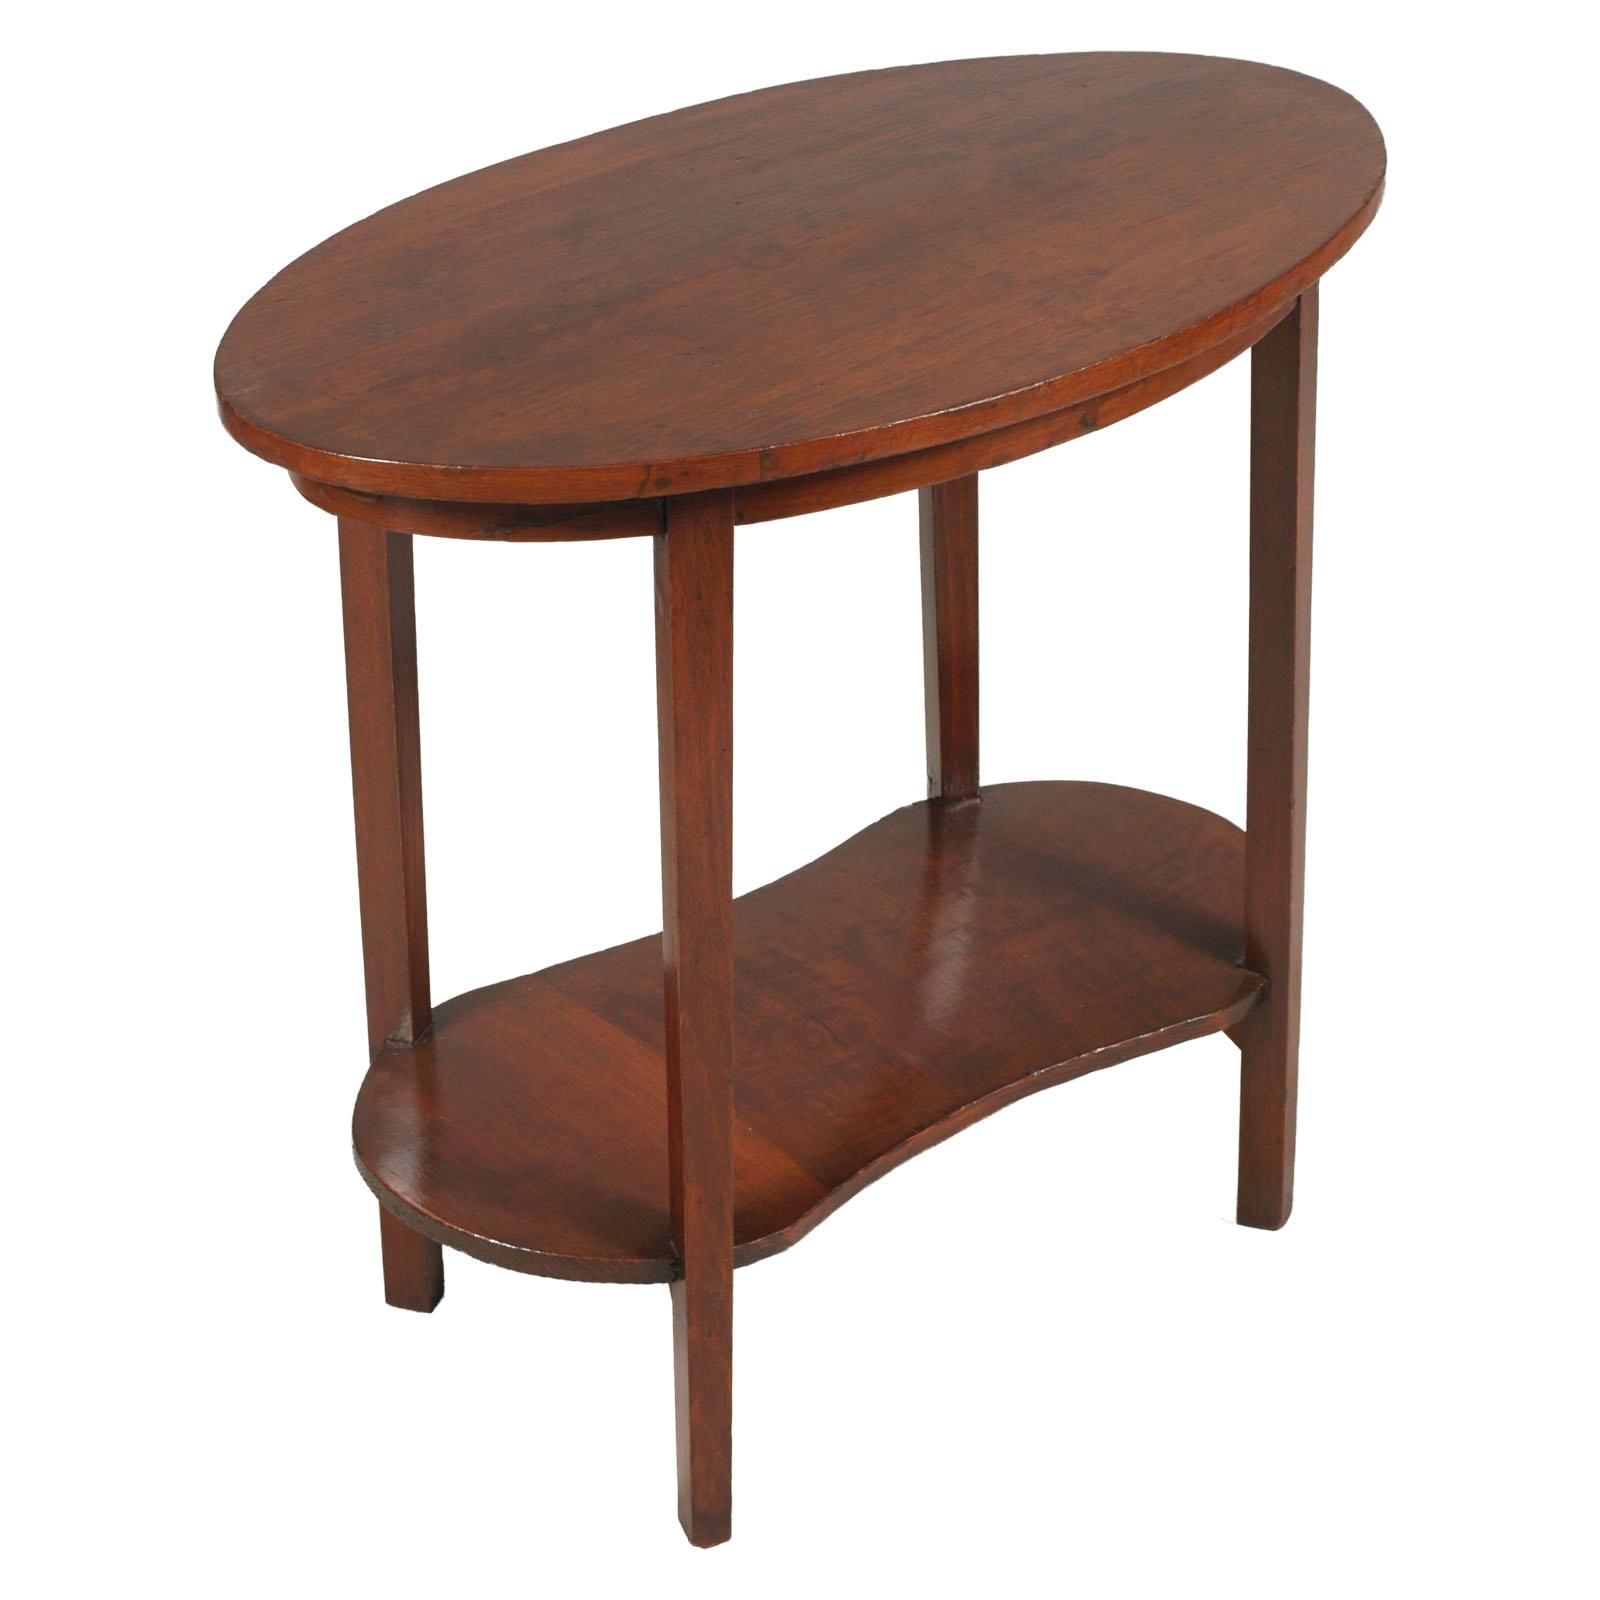 Early 20th Century Small Side Table, Art Nouveau, Wienner Werkstatte manner For Sale